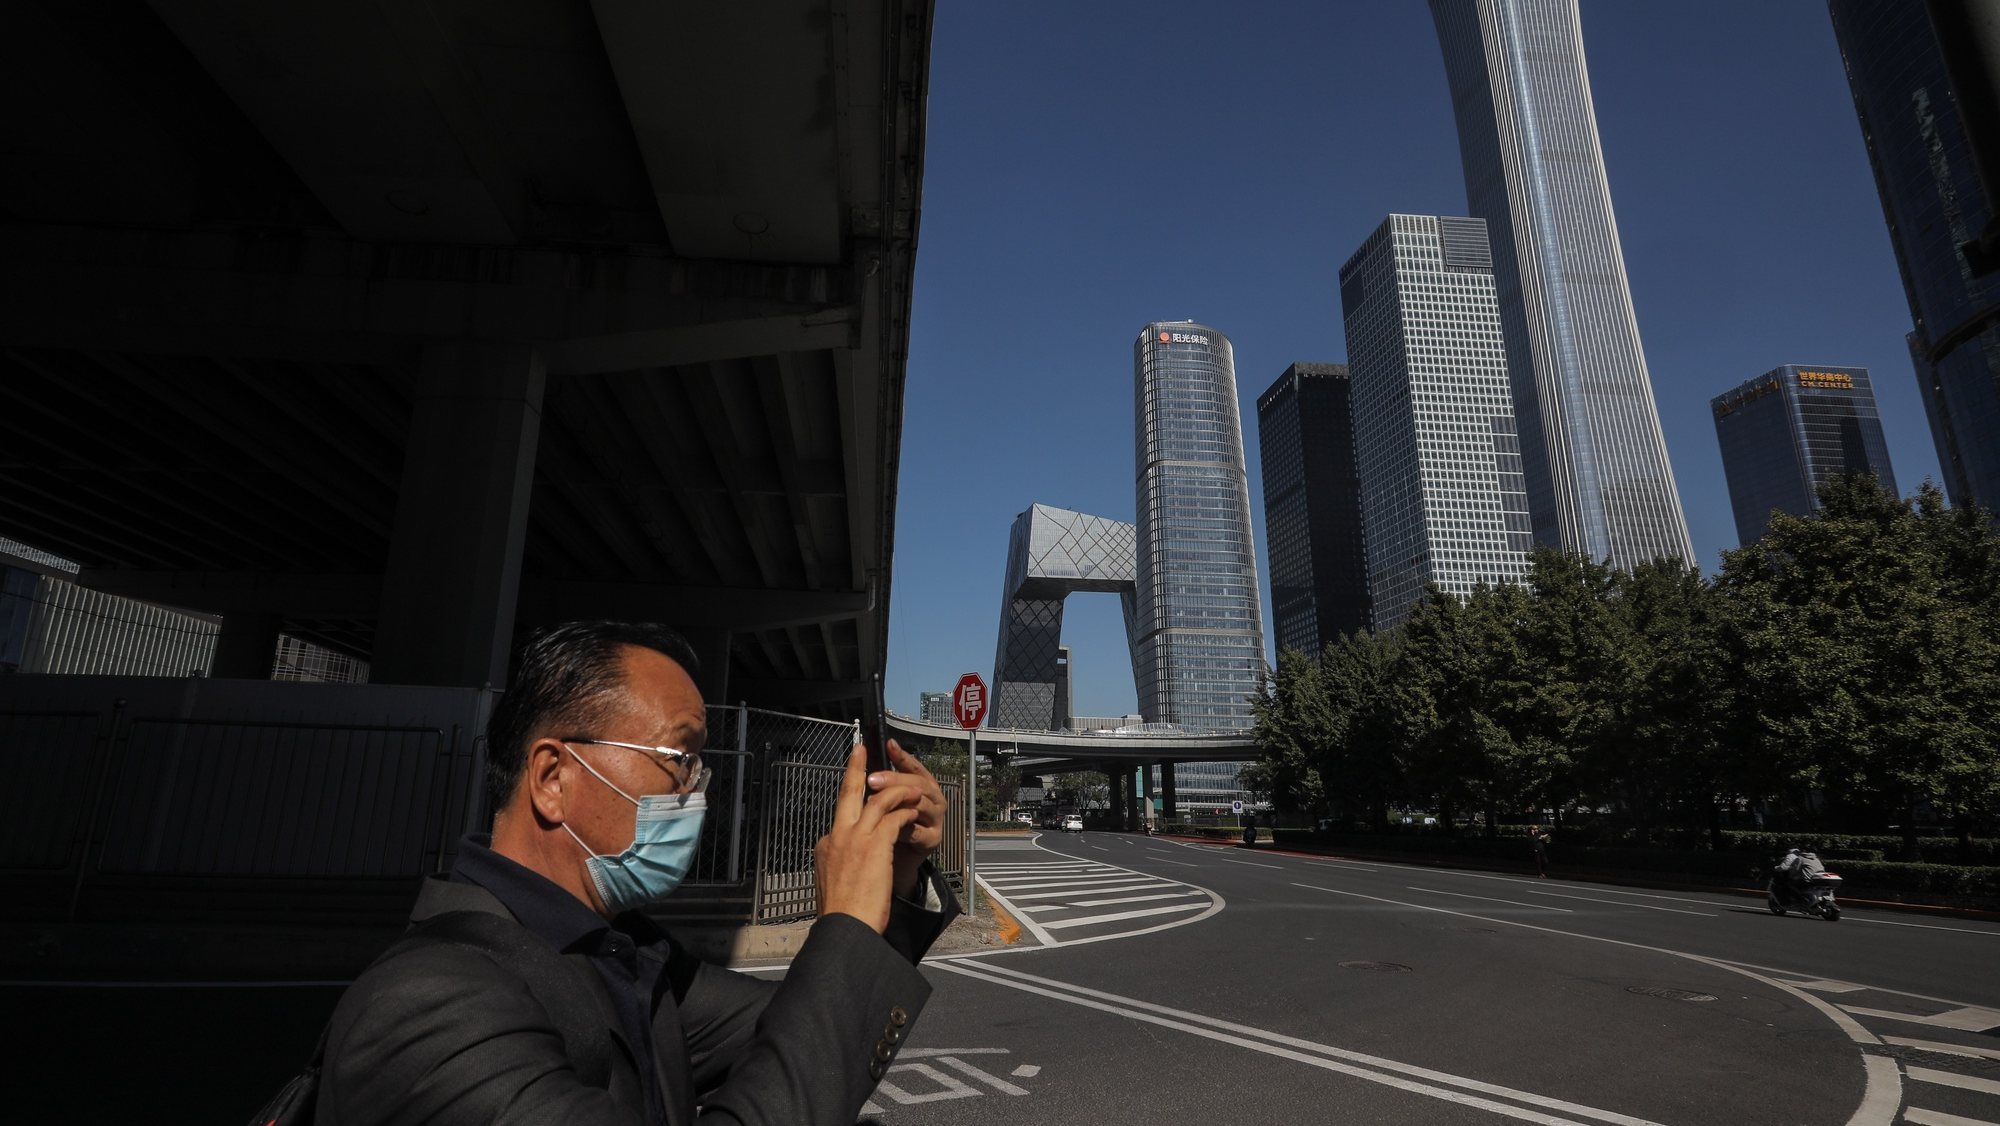 epa09529478 A man uses his mobile phone to take photos in the central business district (CBD) in Beijing, China, 17 October 2021 (issued 18 October 2021). China&#039;s gross domestic product (GDP) rose 4.9 percent year on year in the third quarter of 2021, according to data from the National Bureau of Statistics (NBS) issued on 18 October 2021.  EPA/WU HONG